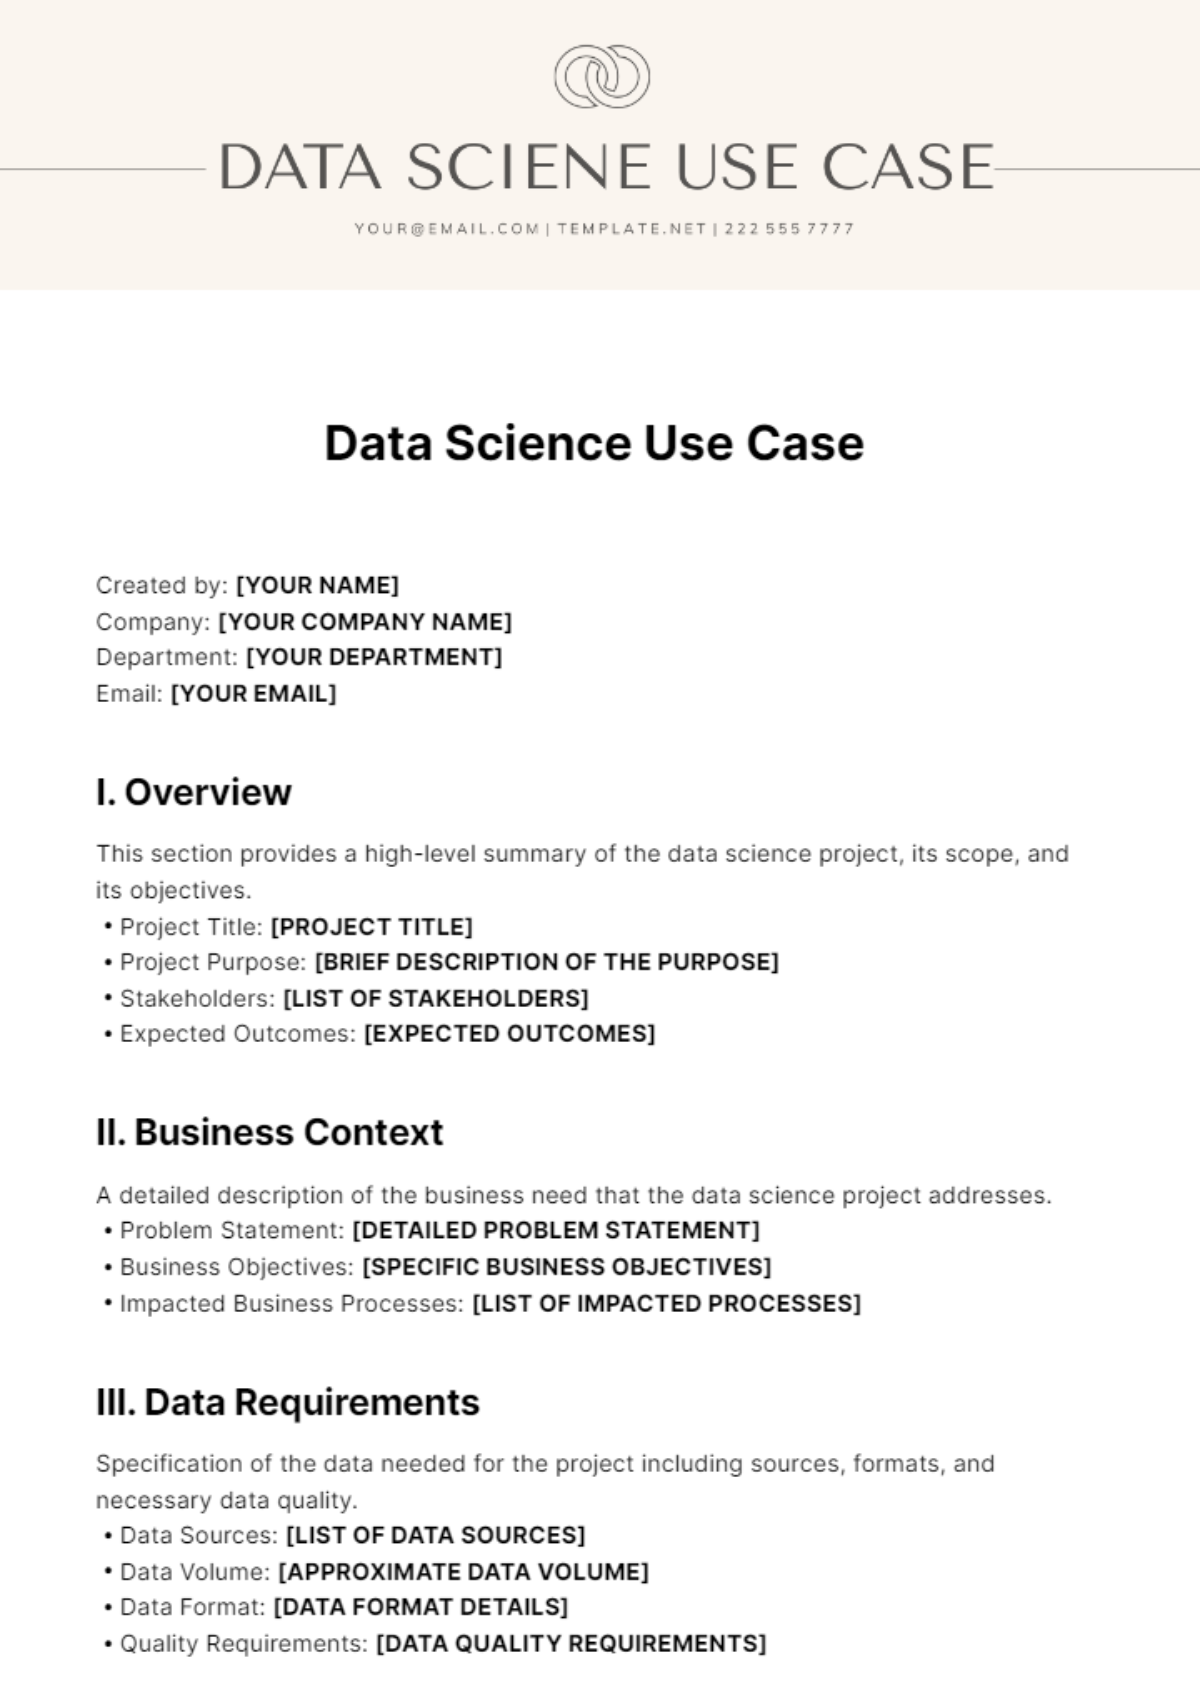 Data Science Use Case Template